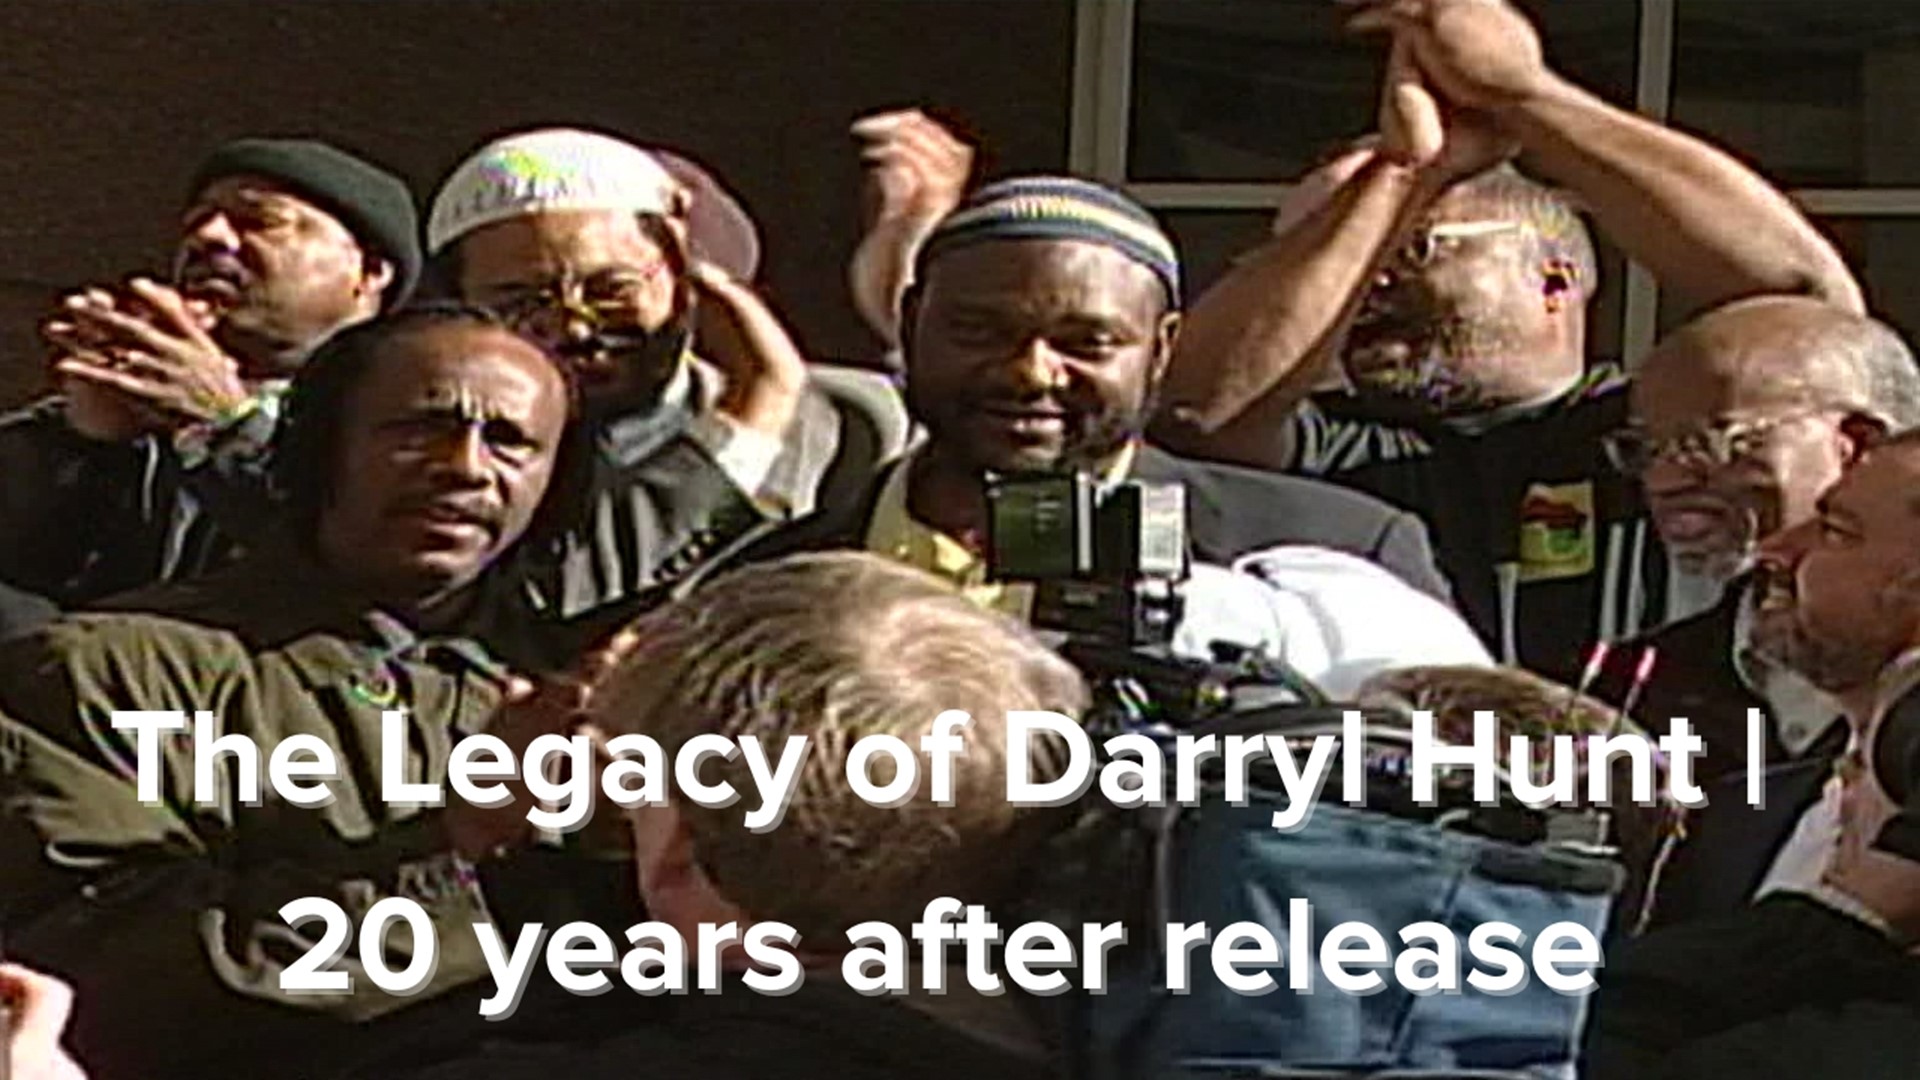 Darryl Hunt spent nearly two decades behind bars for a crime he didn’t commit. He died 12 years after his exoneration. His legacy lives on in Winston-Salem.